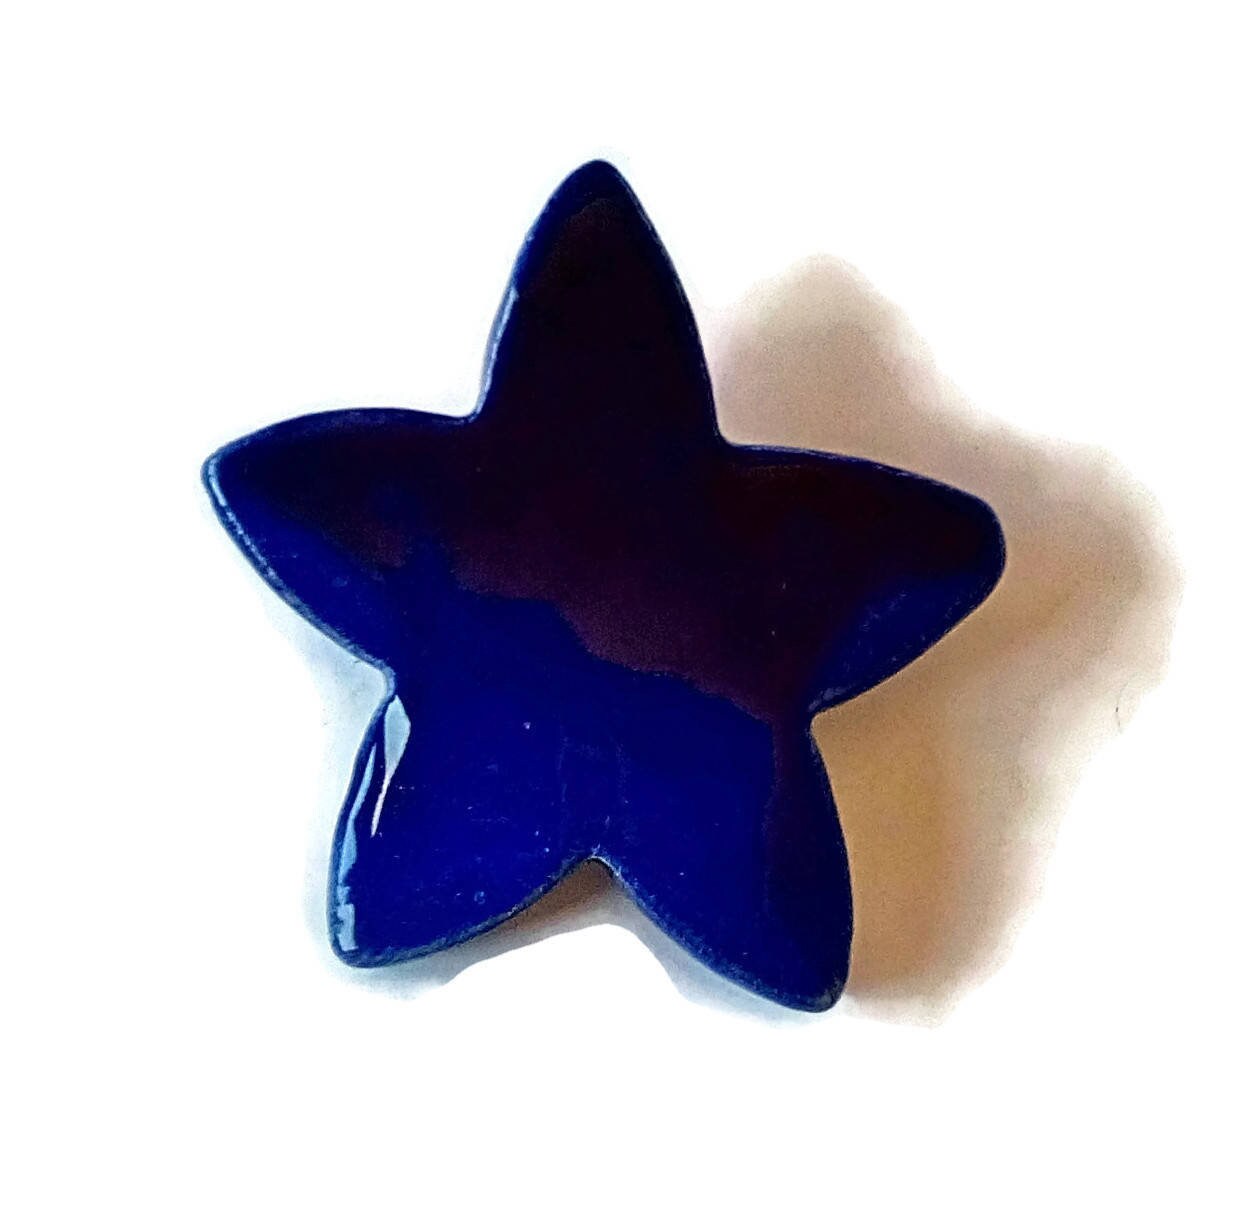 Unique Handmade Ceramic Glssy Dark Blue Star Brooch For Women, Clay Broach Pin For Her, Small Celestial Scarf Brooch Gift For Wife - Ceramica Ana Rafael